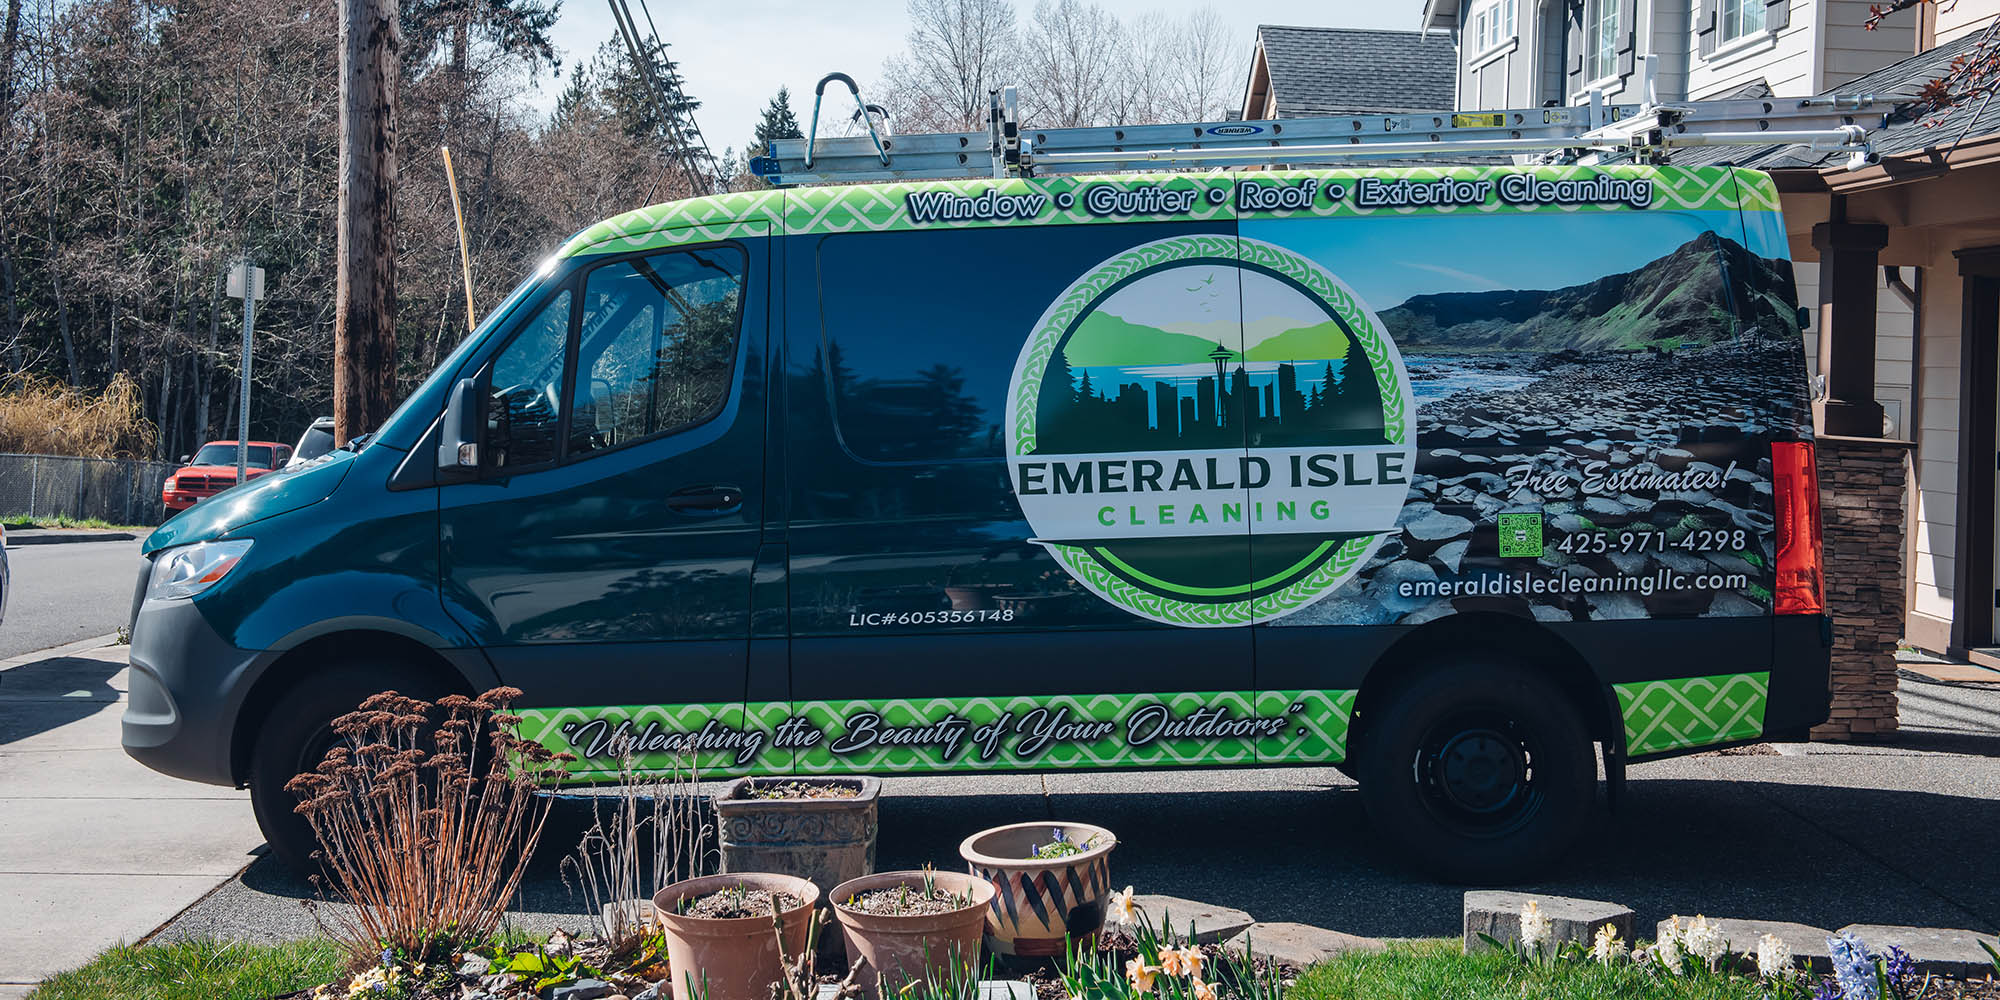 the side view of the emerald isle cleaning van